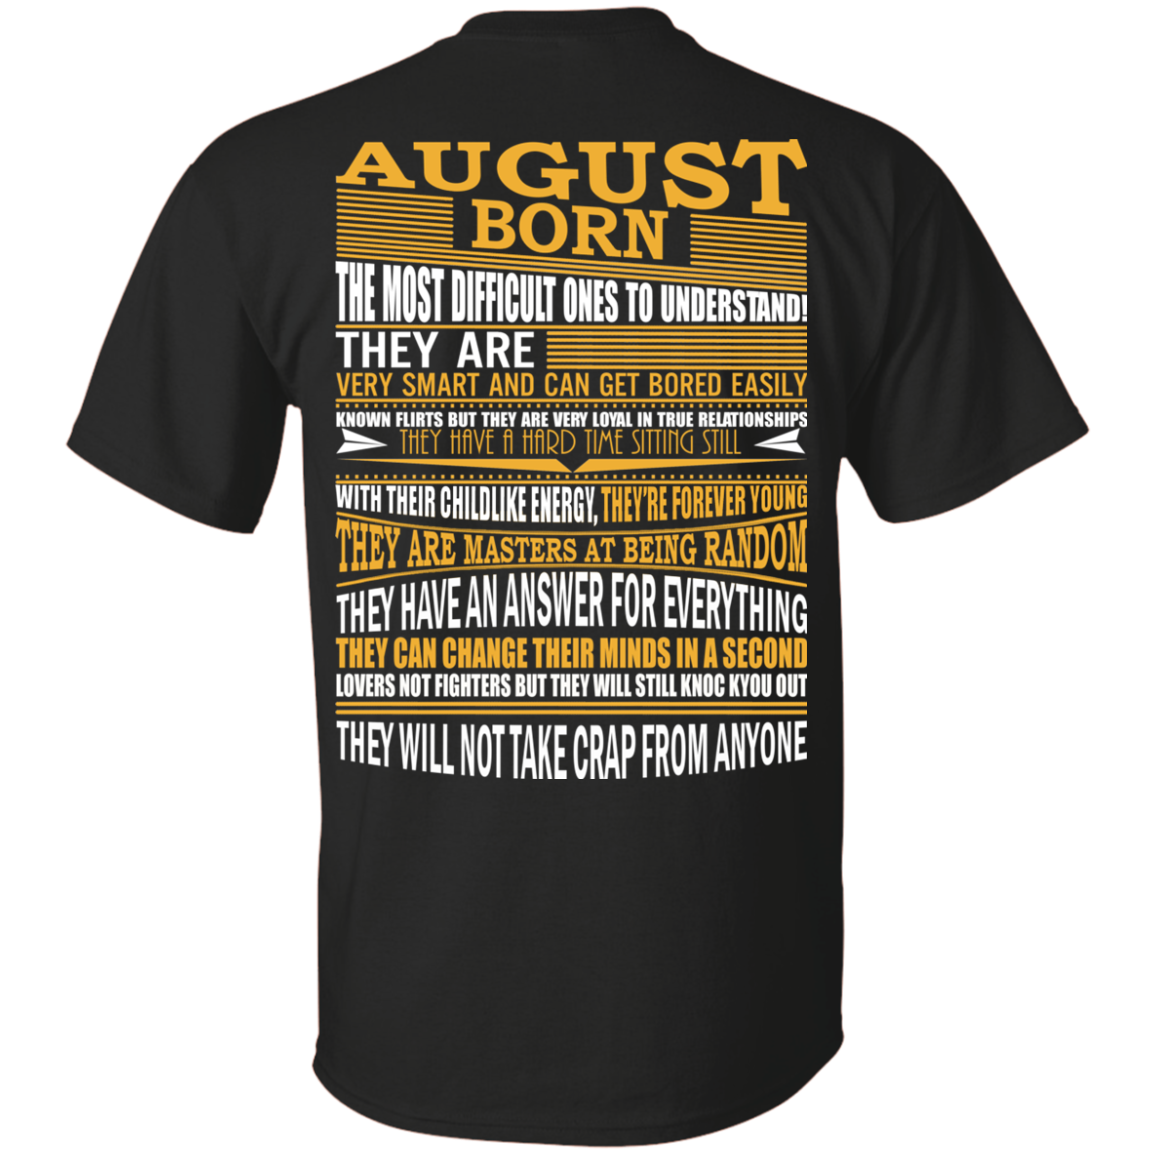 August Born - The Most Difficult Ones To Understand Shirt - Back Design